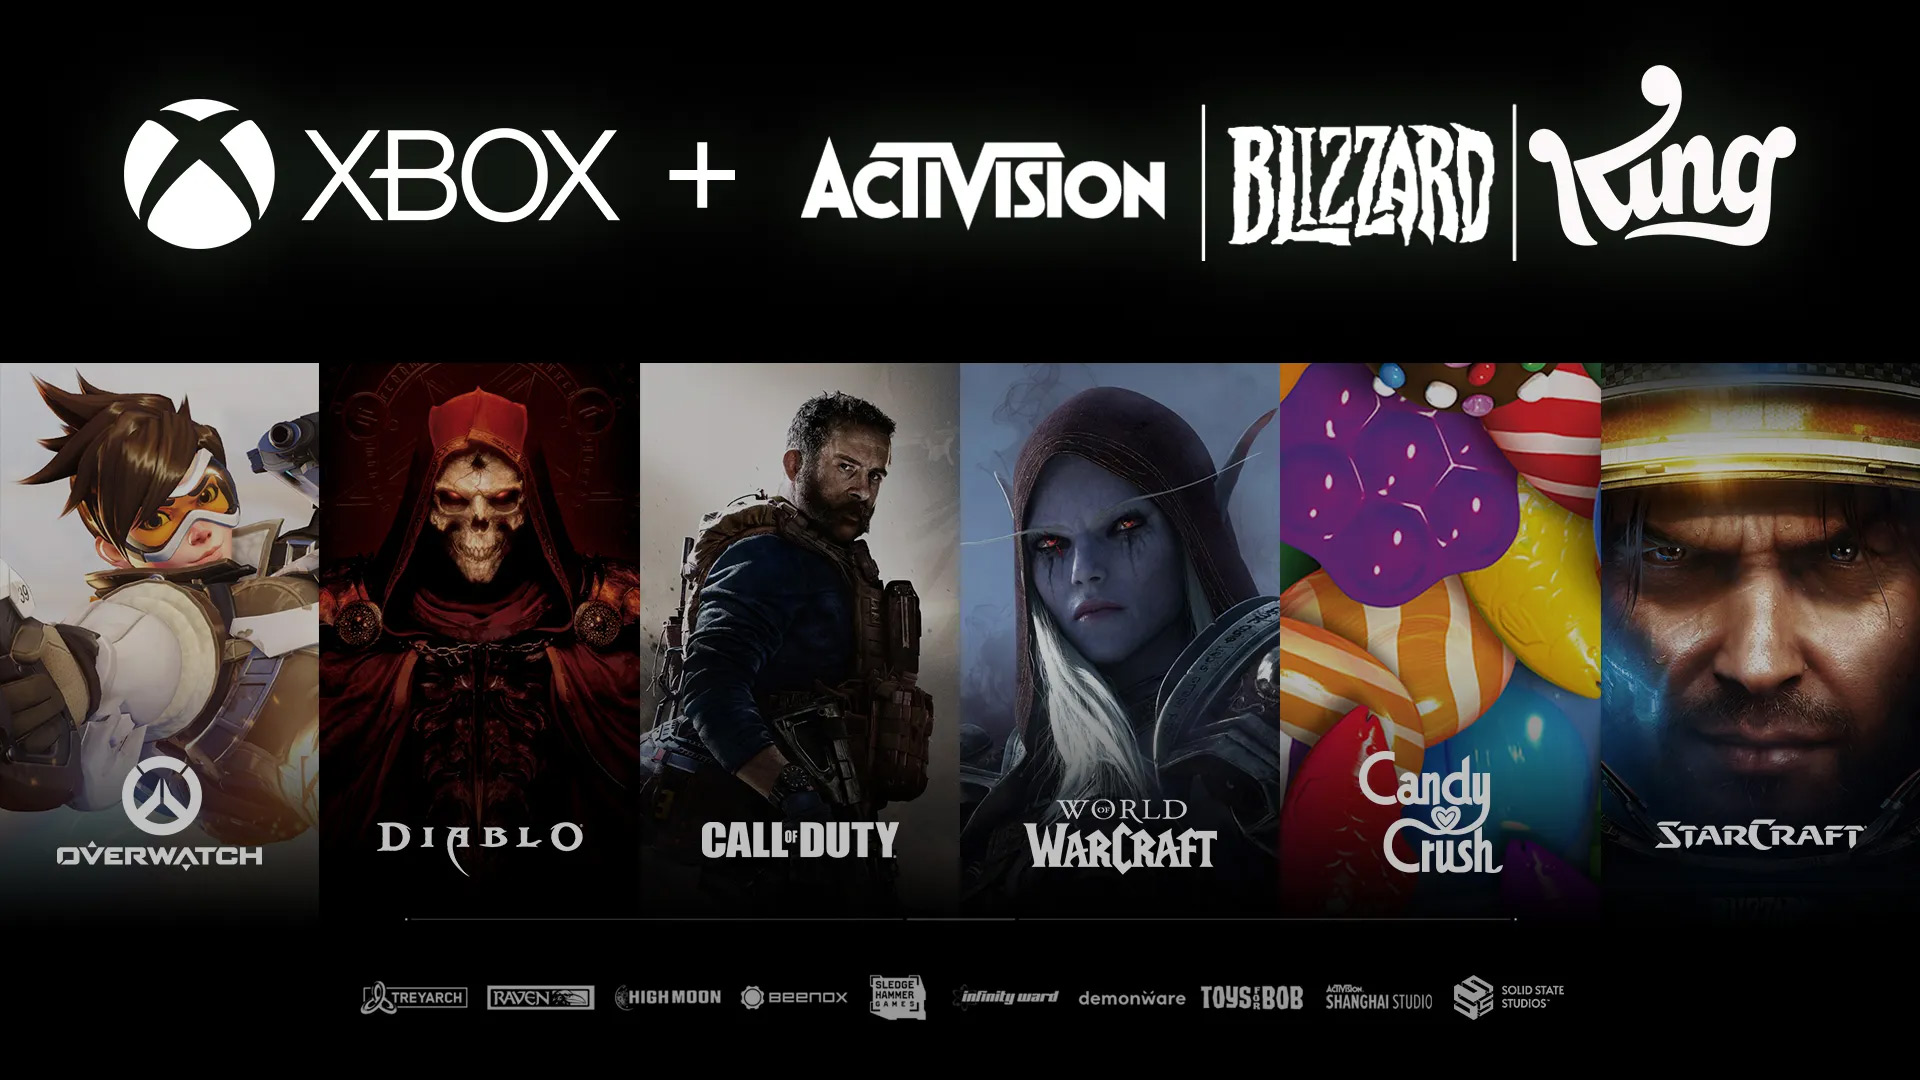 Microsoft is working on getting approval for its acquisition of Activision Blizzard